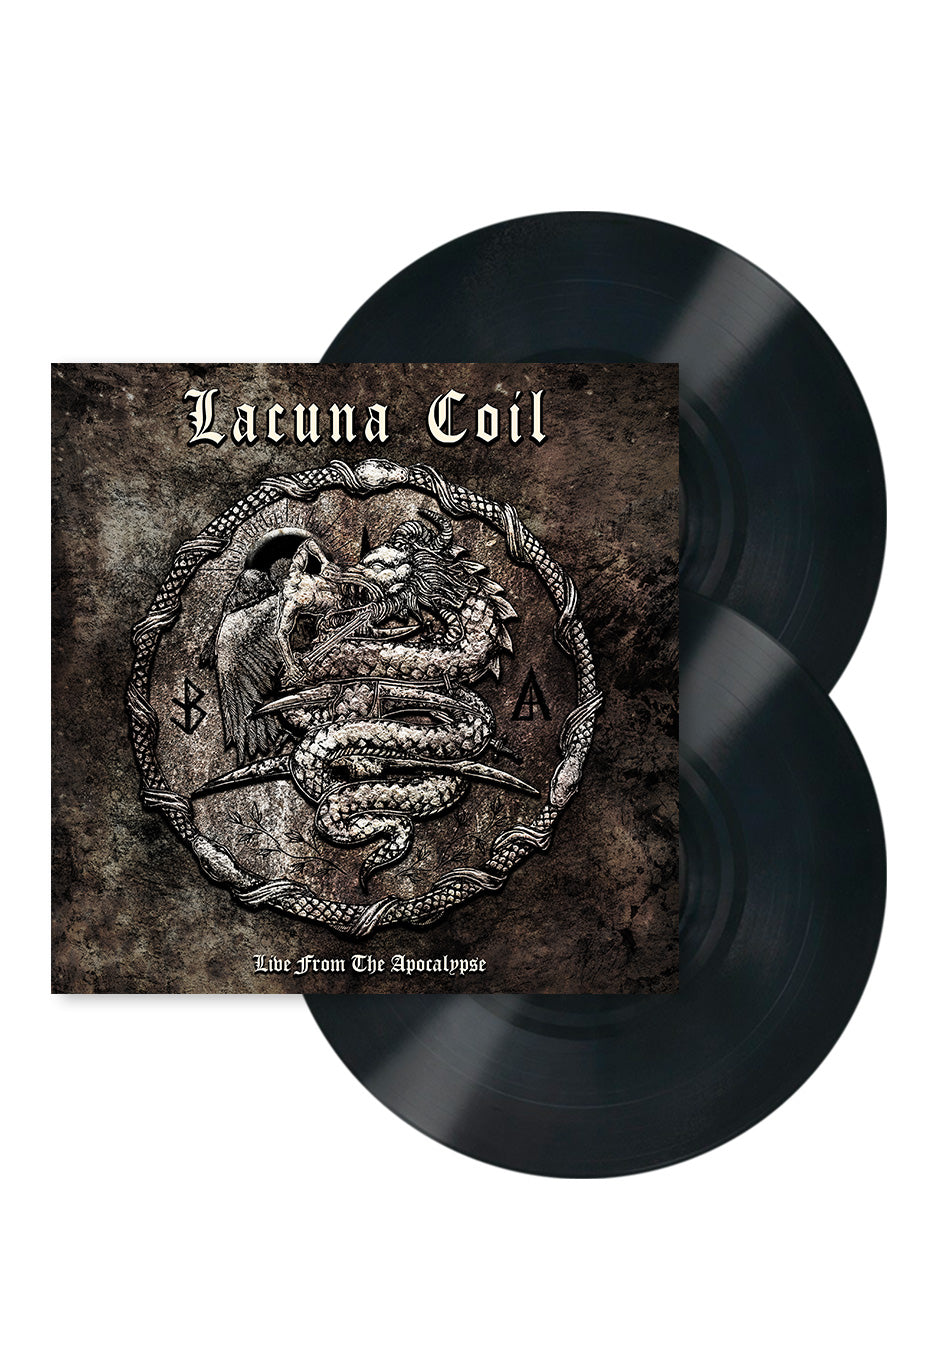 Lacuna Coil - Live From The Apocalypse - 2 Vinyl + DVD